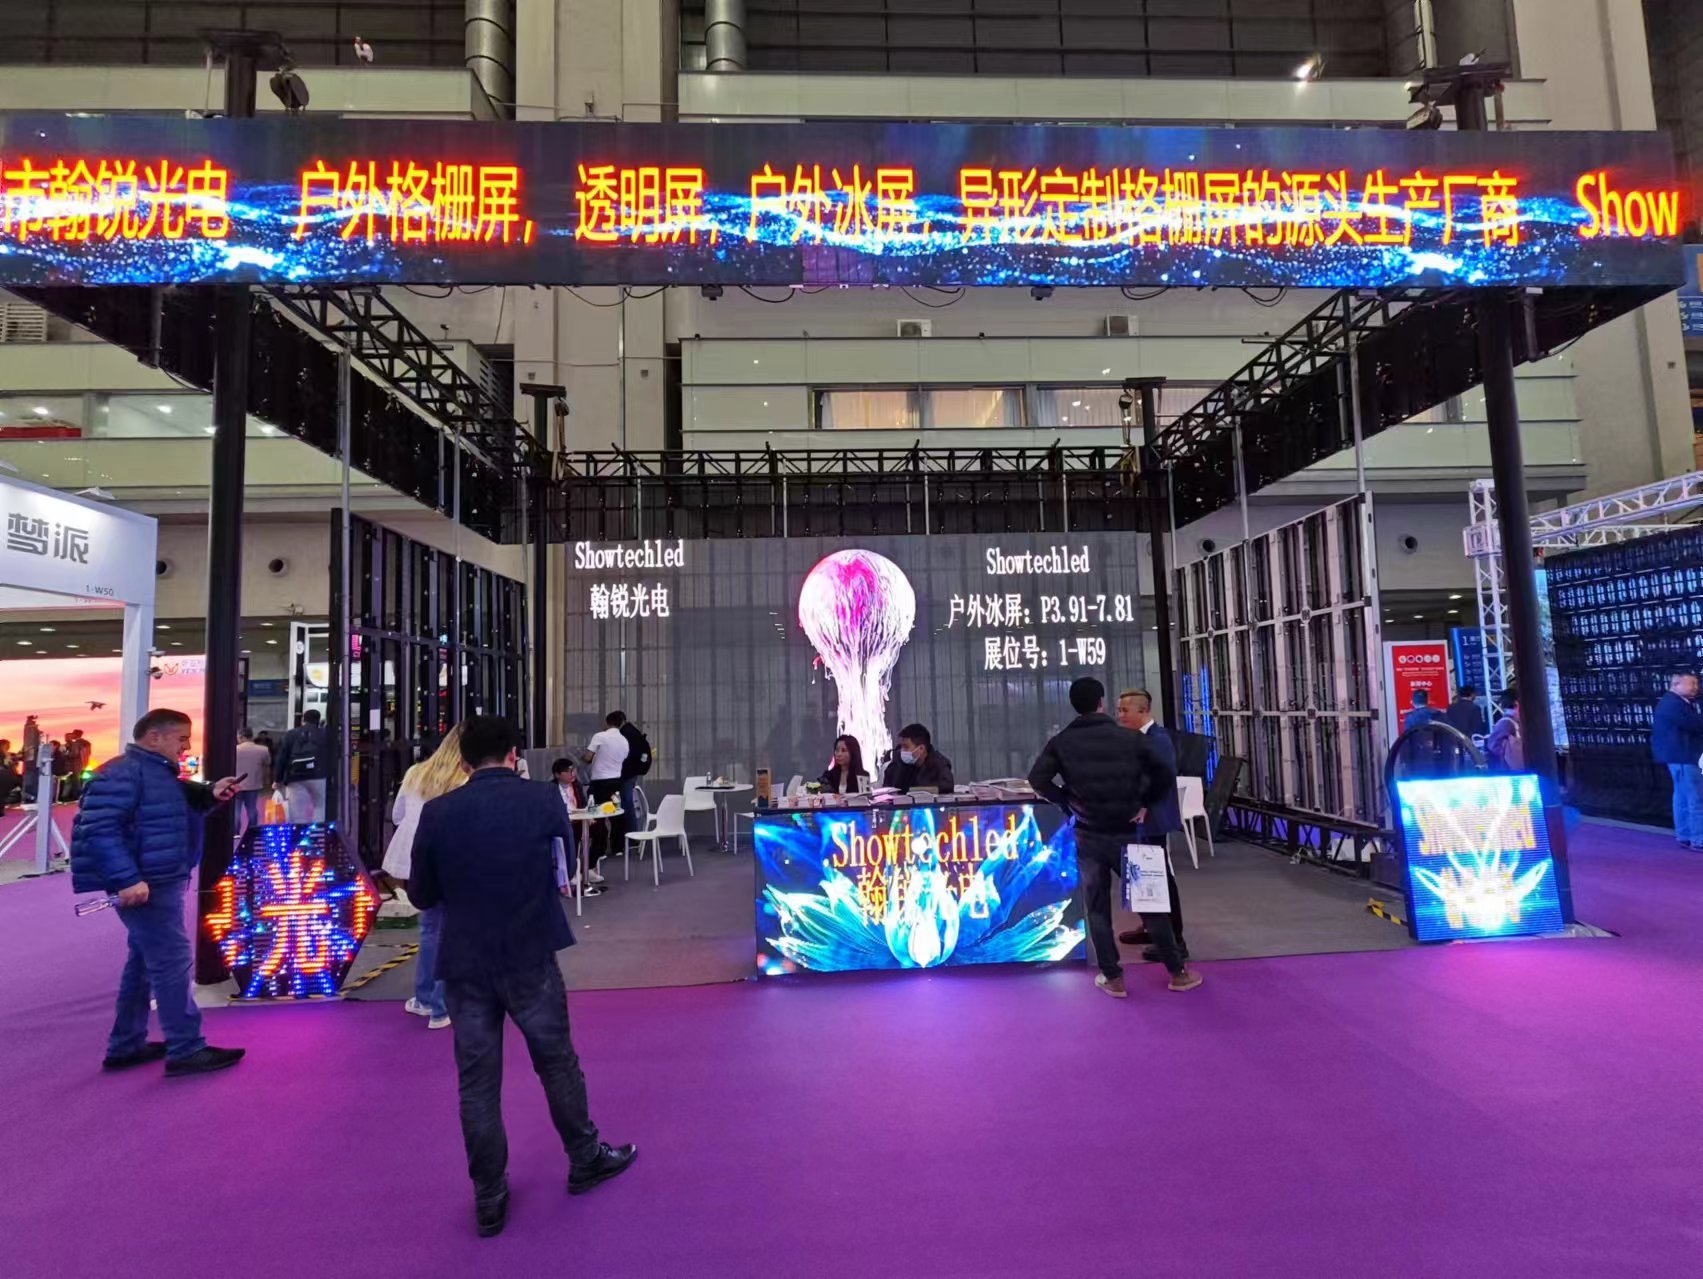 Outdoor LED rental screen